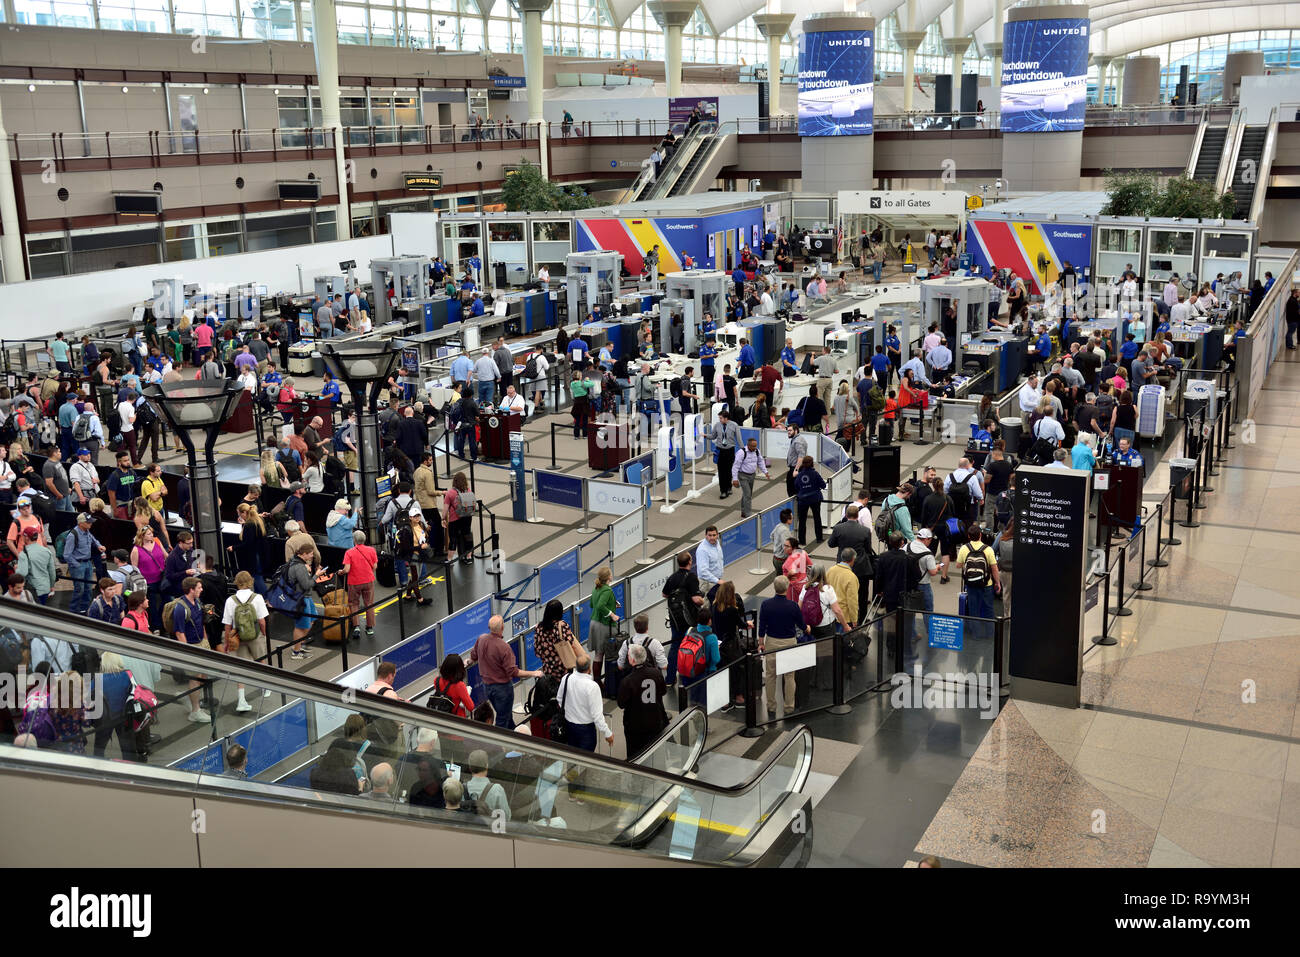 Security screening with lines of waiting passengers at Denver International Airport (DEN), Colorado, USA Stock Photo